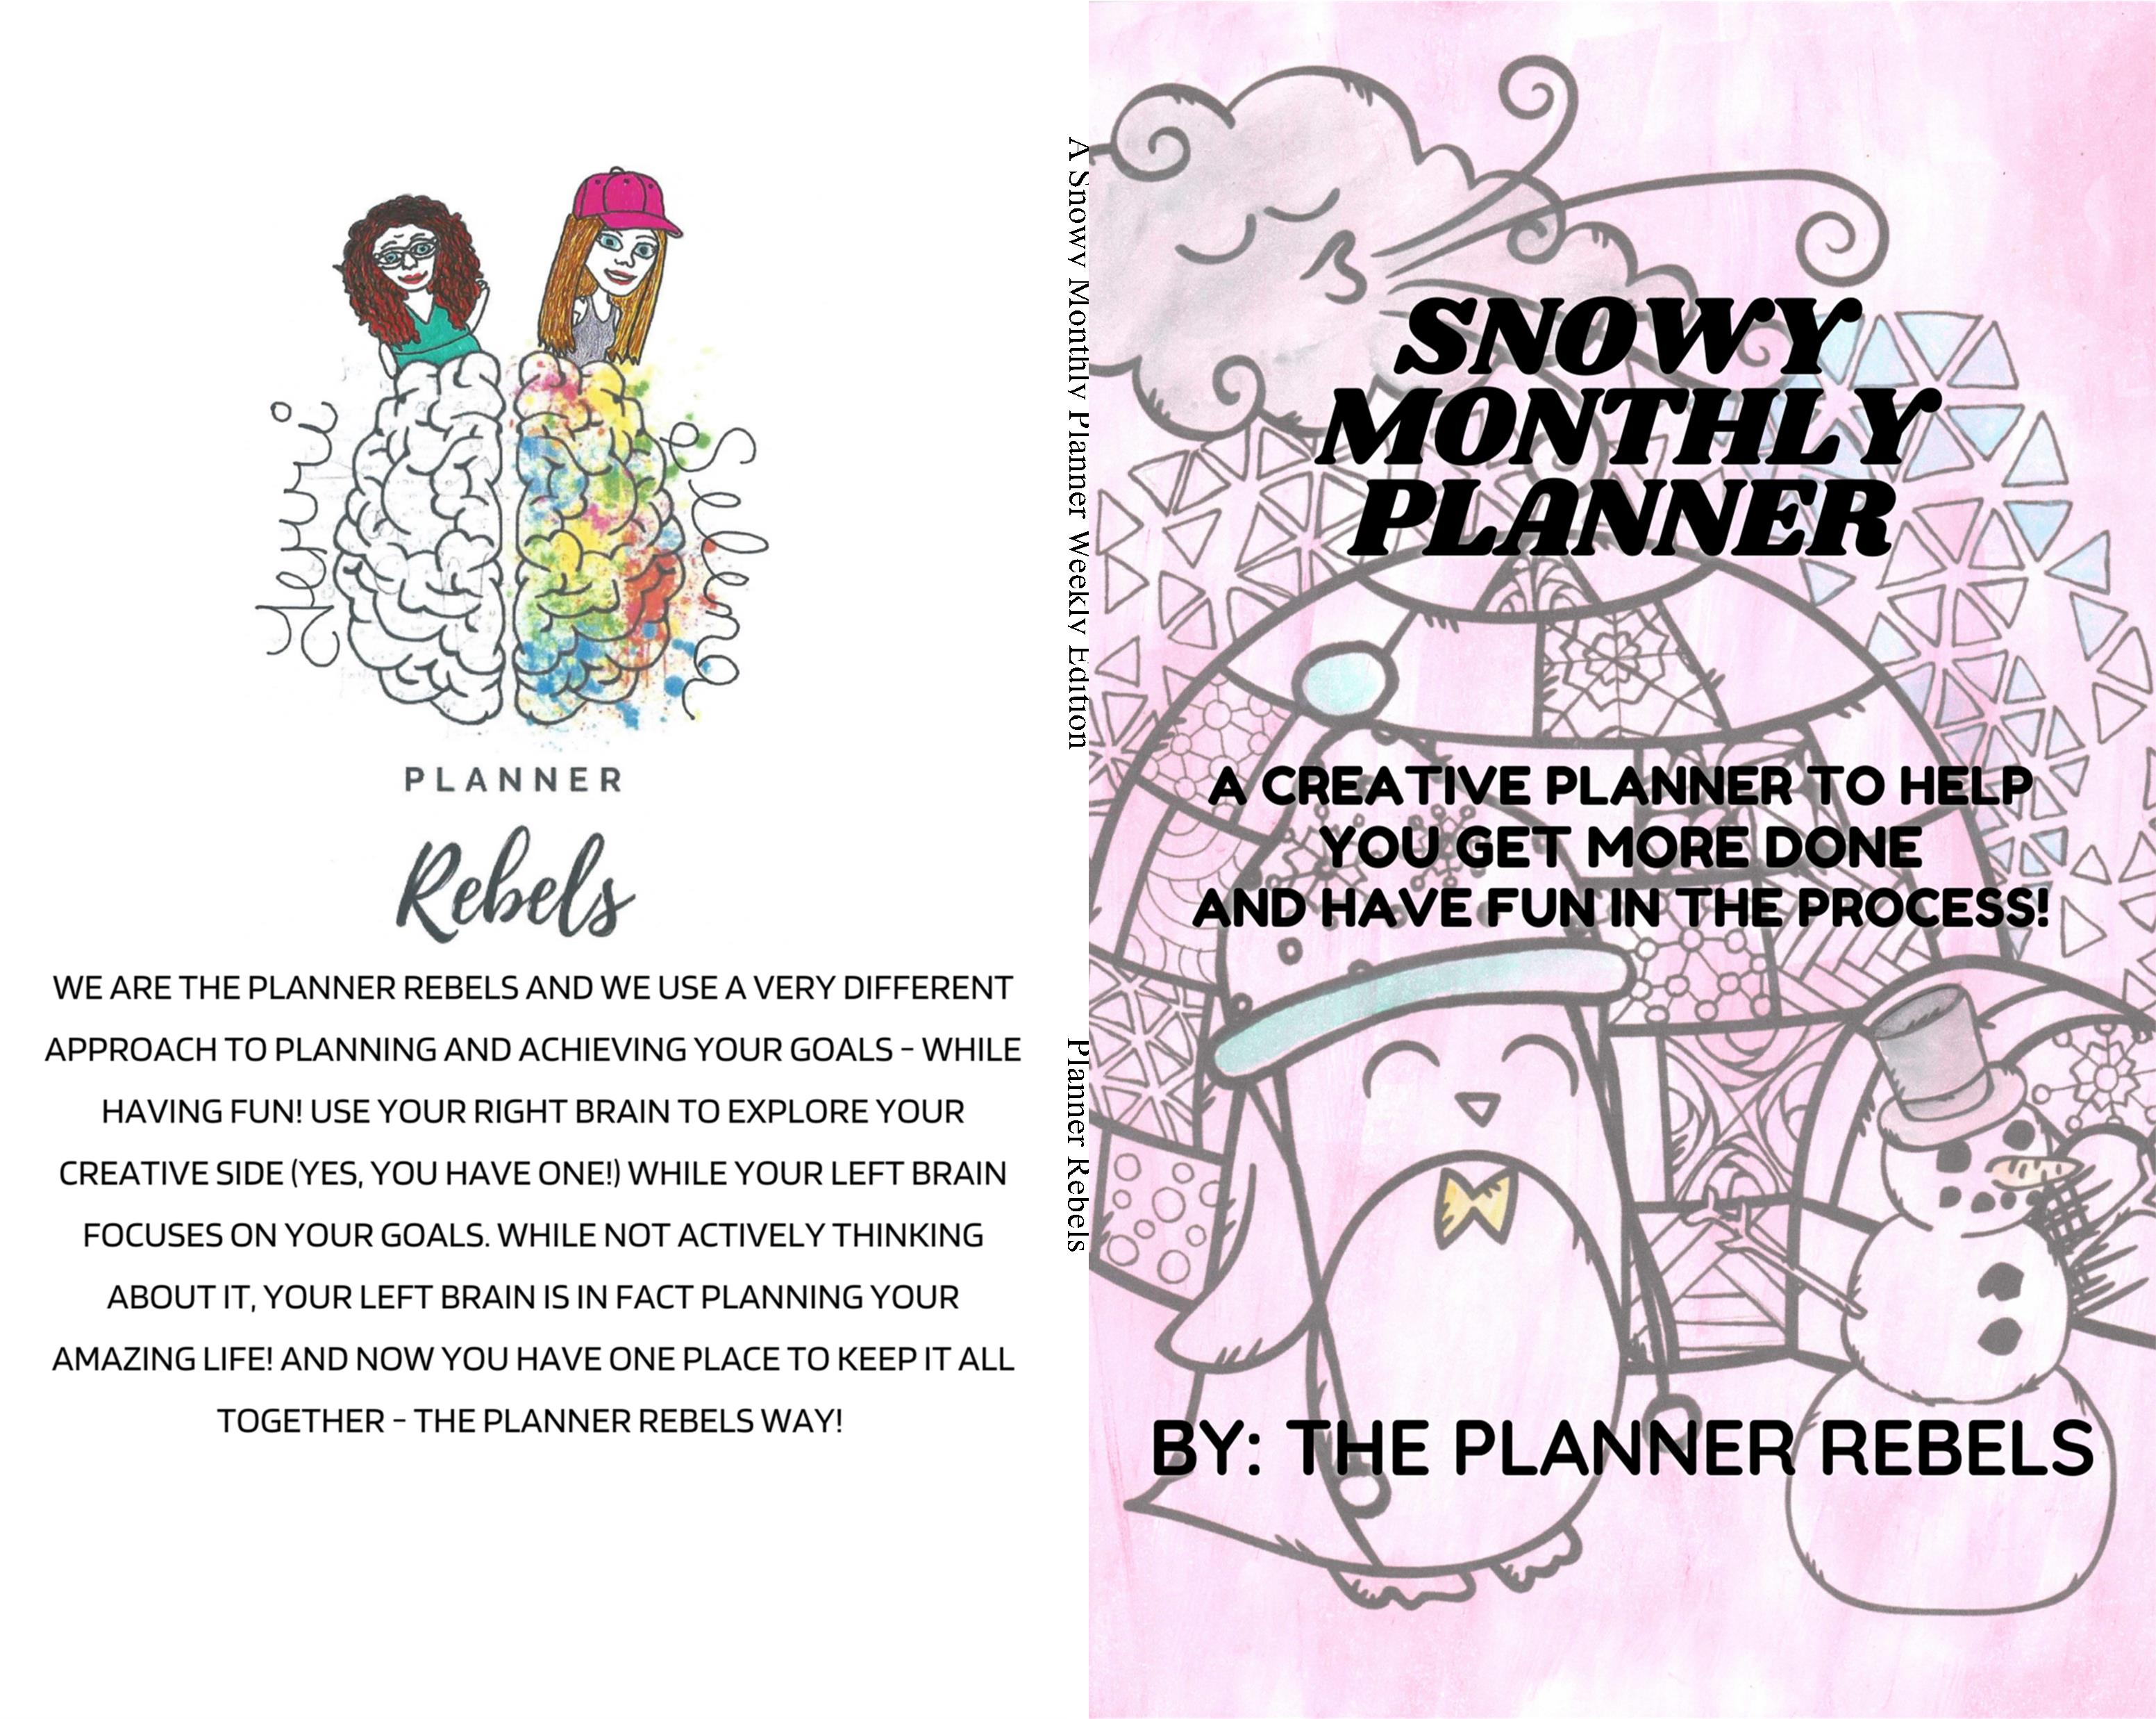 A Snowy Monthly Planner Weekly Edition cover image